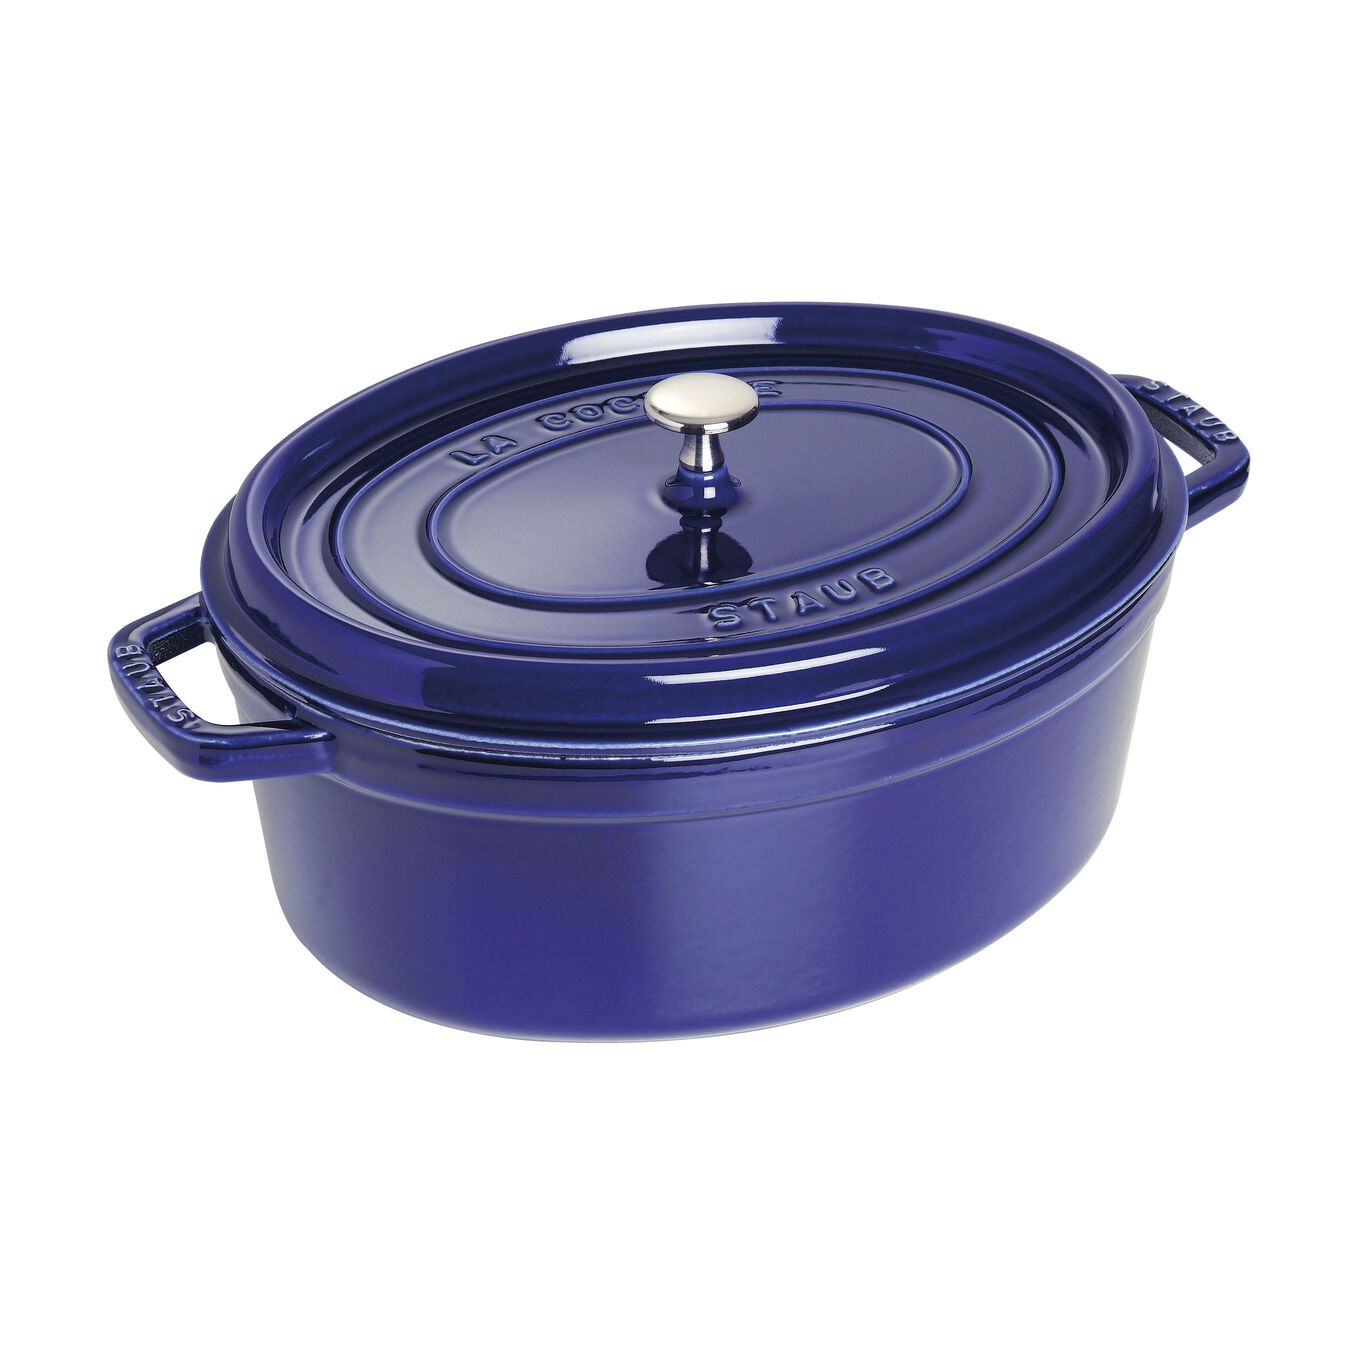 Staub Oval Cocotte in Cast Iron